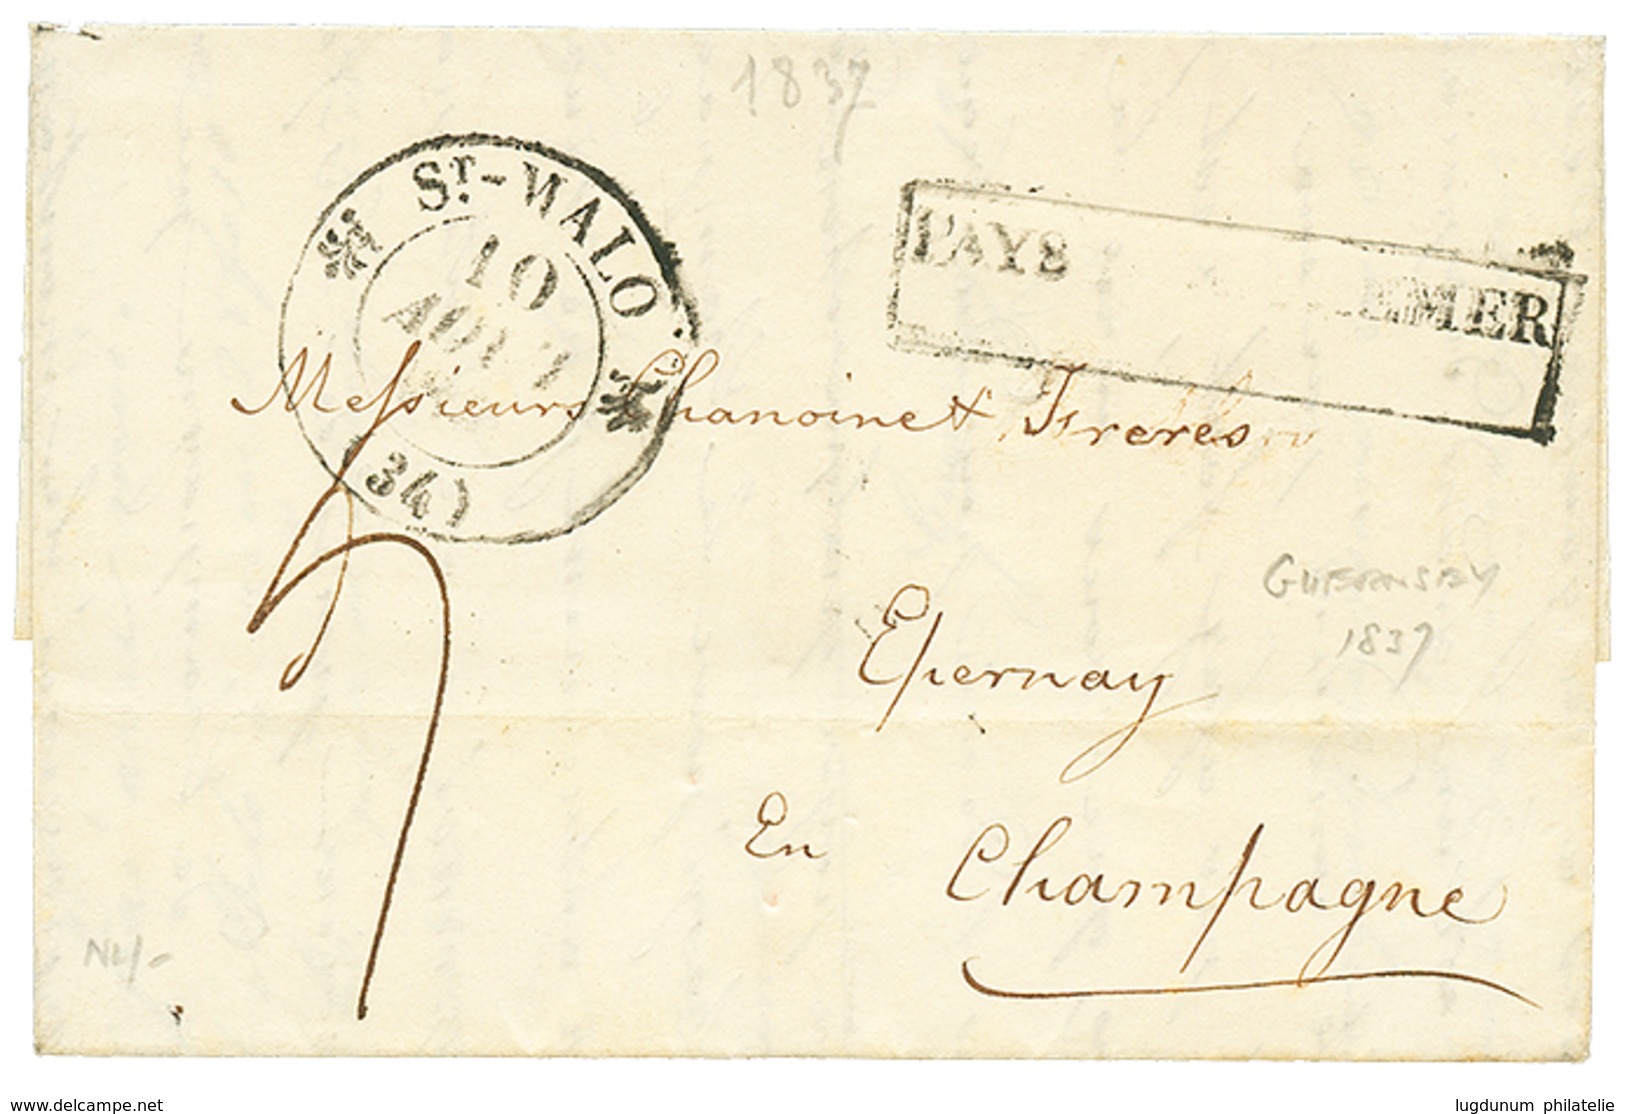 151 1837 PAYS D' OUTREMER + Type 12 ST MALO Sur Lettre Avec Texte De GUERNESEY Pour EPERNAY. TB. - Guernesey